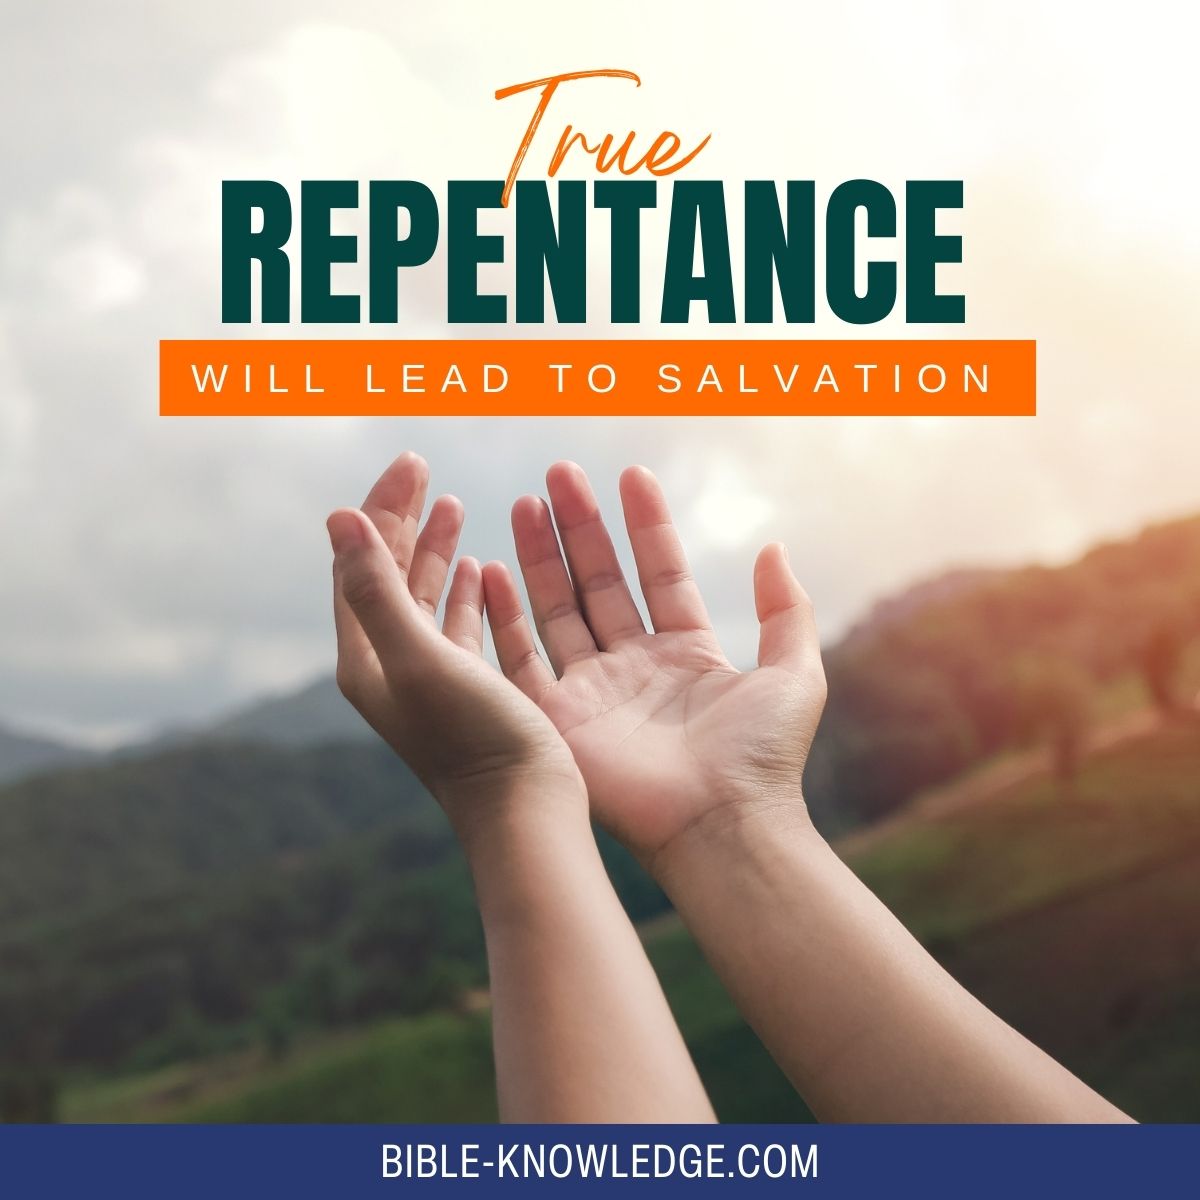 True Repentance Will Lead to Salvation